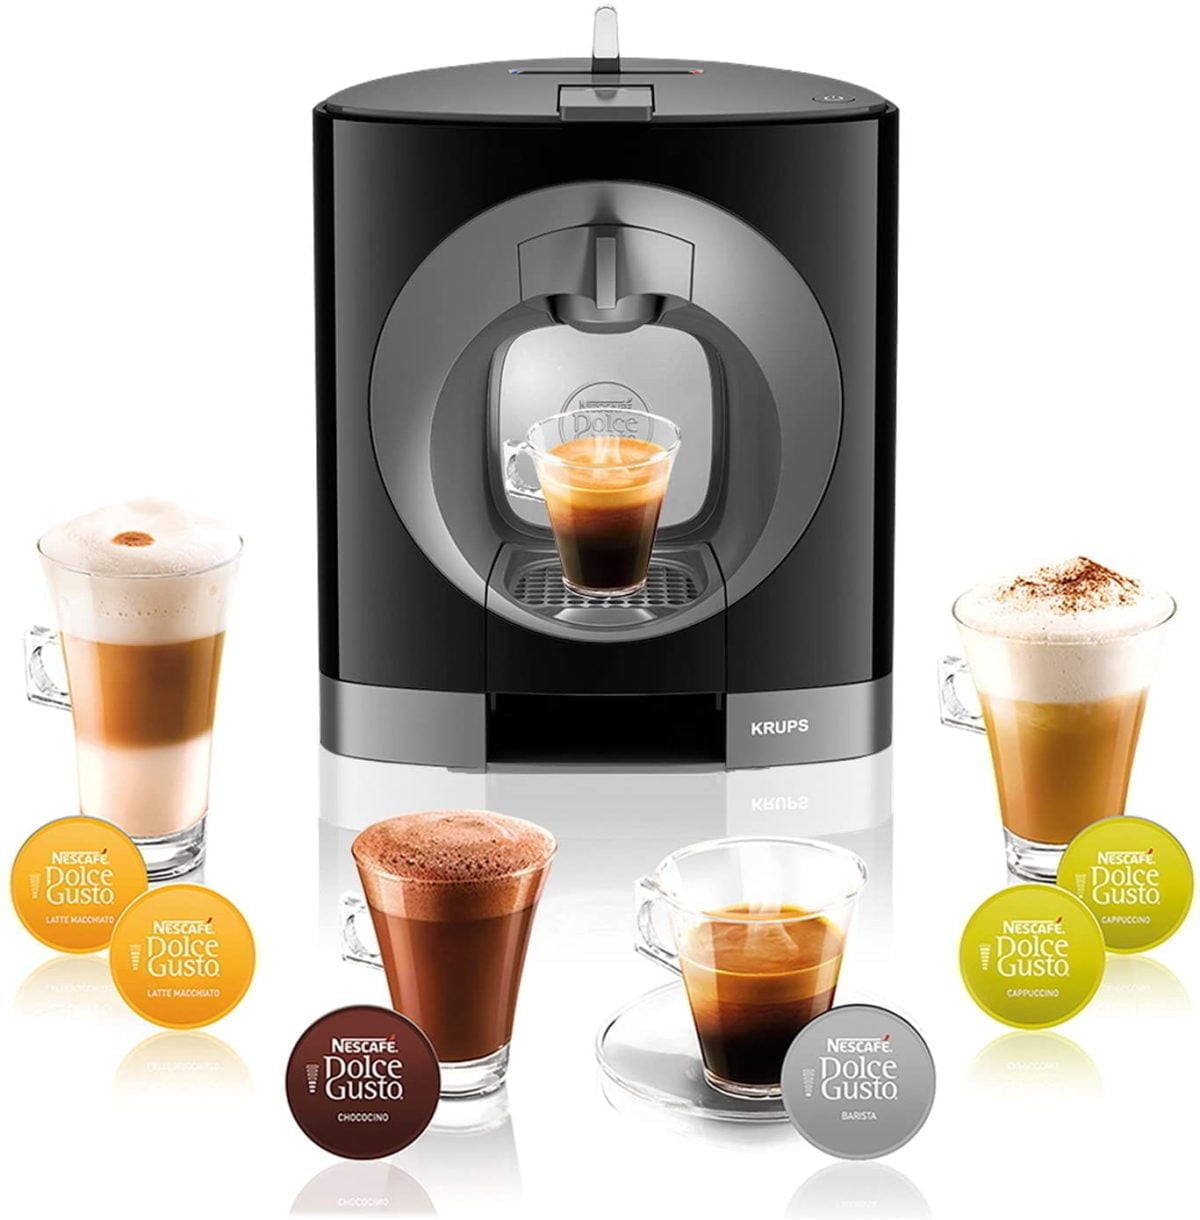 71U79Hxd5Wl. Ac Sl1500 Nescafe Compact And Attractive At The Same Time - A Nescafé® Dolce Gusto® Oblo® Machine Suits Every Kitchen. In Its Elegant Piano Black Housing, It Not Only Makes A Lot Of Looks, But Also Your Favorite Drink In The Very Best Coffee Shop Quality. Whether You Like It Hot Or Cold: Simply Pull The Lever And The Nescafé® Dolce Gusto® Oblo® Machine Will Serve You Every Drink From Espresso To Iced Tea In A Matter Of Seconds. With A Maximum Pump Pressure Of 15 Bar And Magnetic Capsule Holder. Https://Youtu.be/D-Oy1Dj2R8Q Krups Krups, Dolce Gusto Oblo Kp 1108